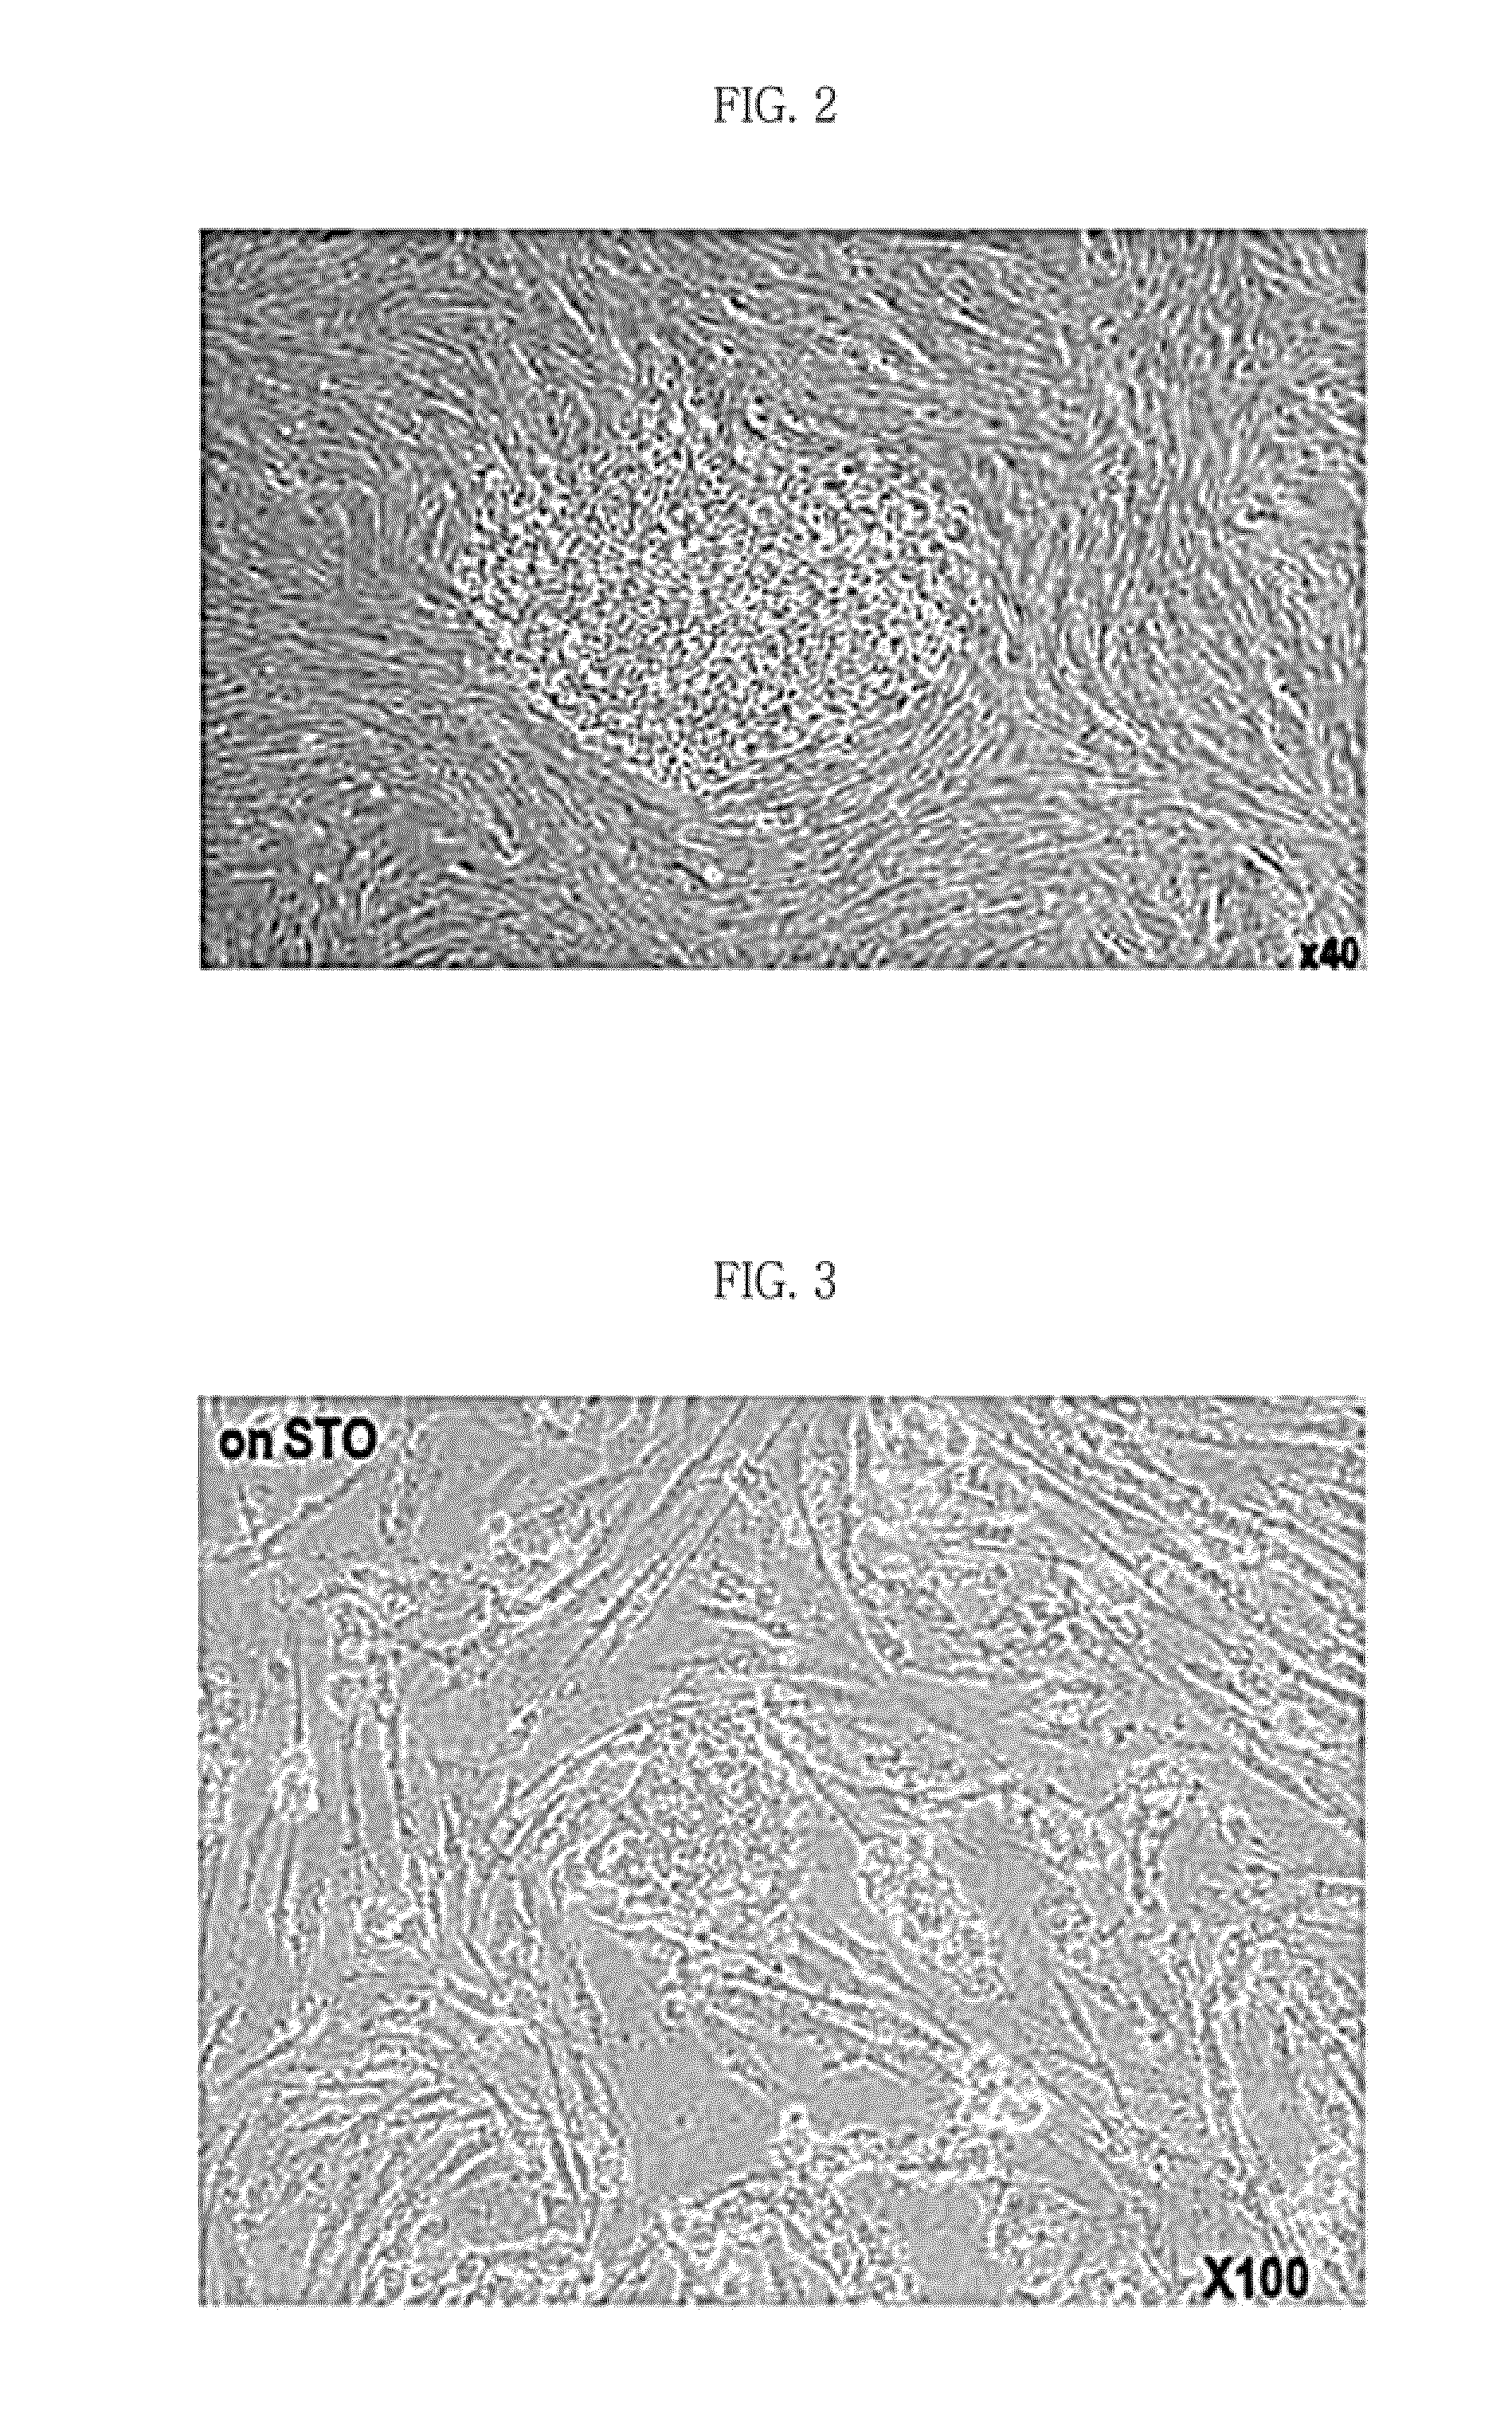 Method for inducing pluripotent stem cells and pluripotent stem cells prepared by said method